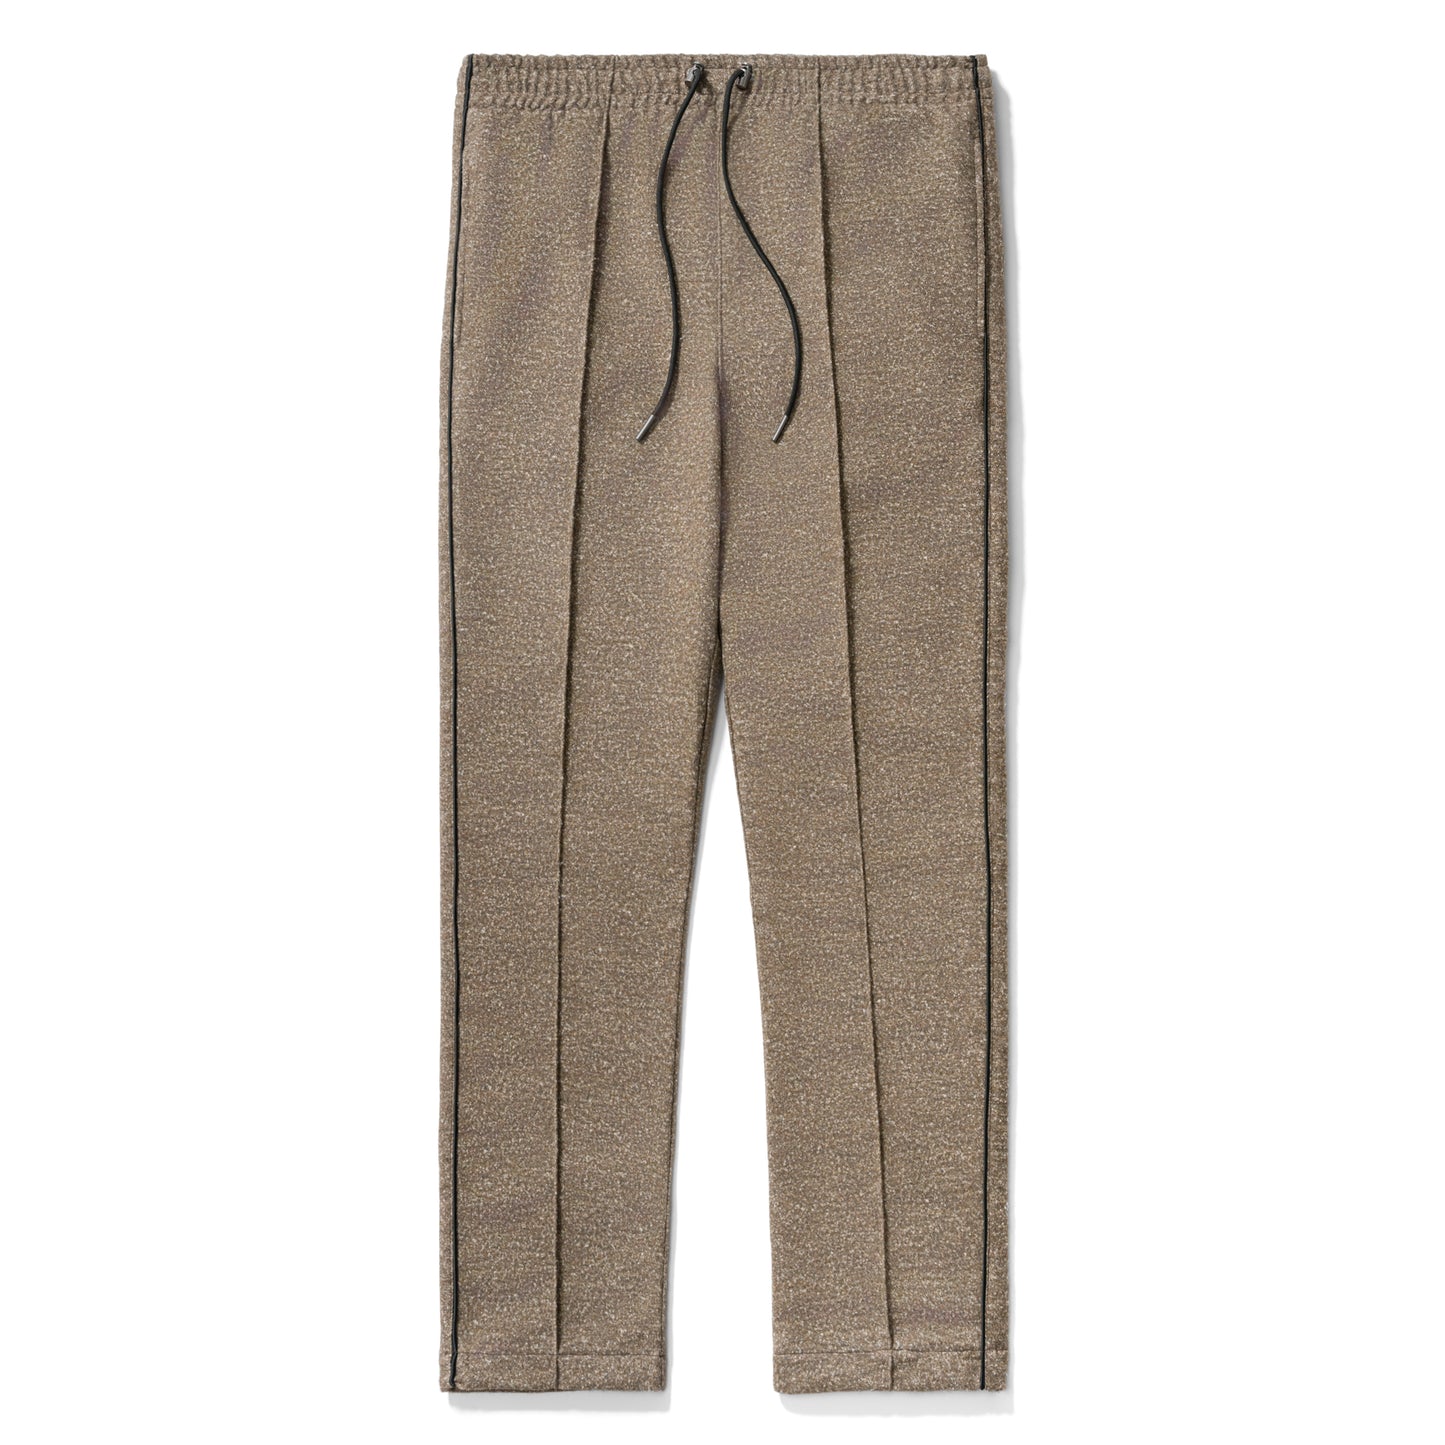 Concepts Chino Pant (Brown/Mulch)